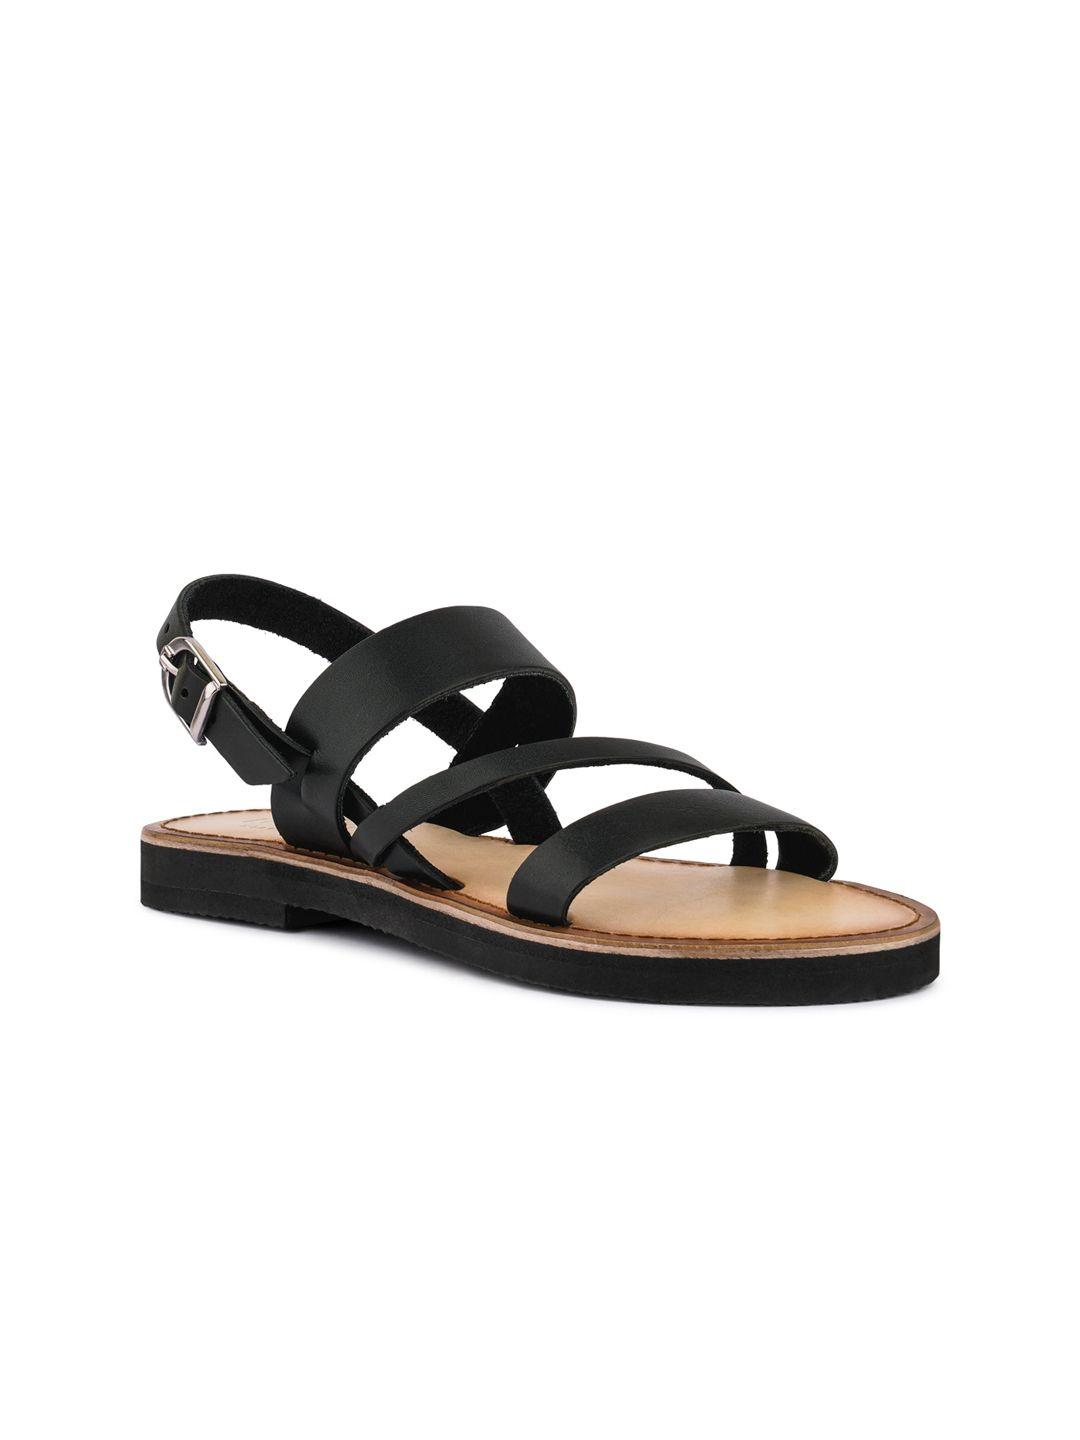 rag & co women buckle detail leather open toe flats with backstrap